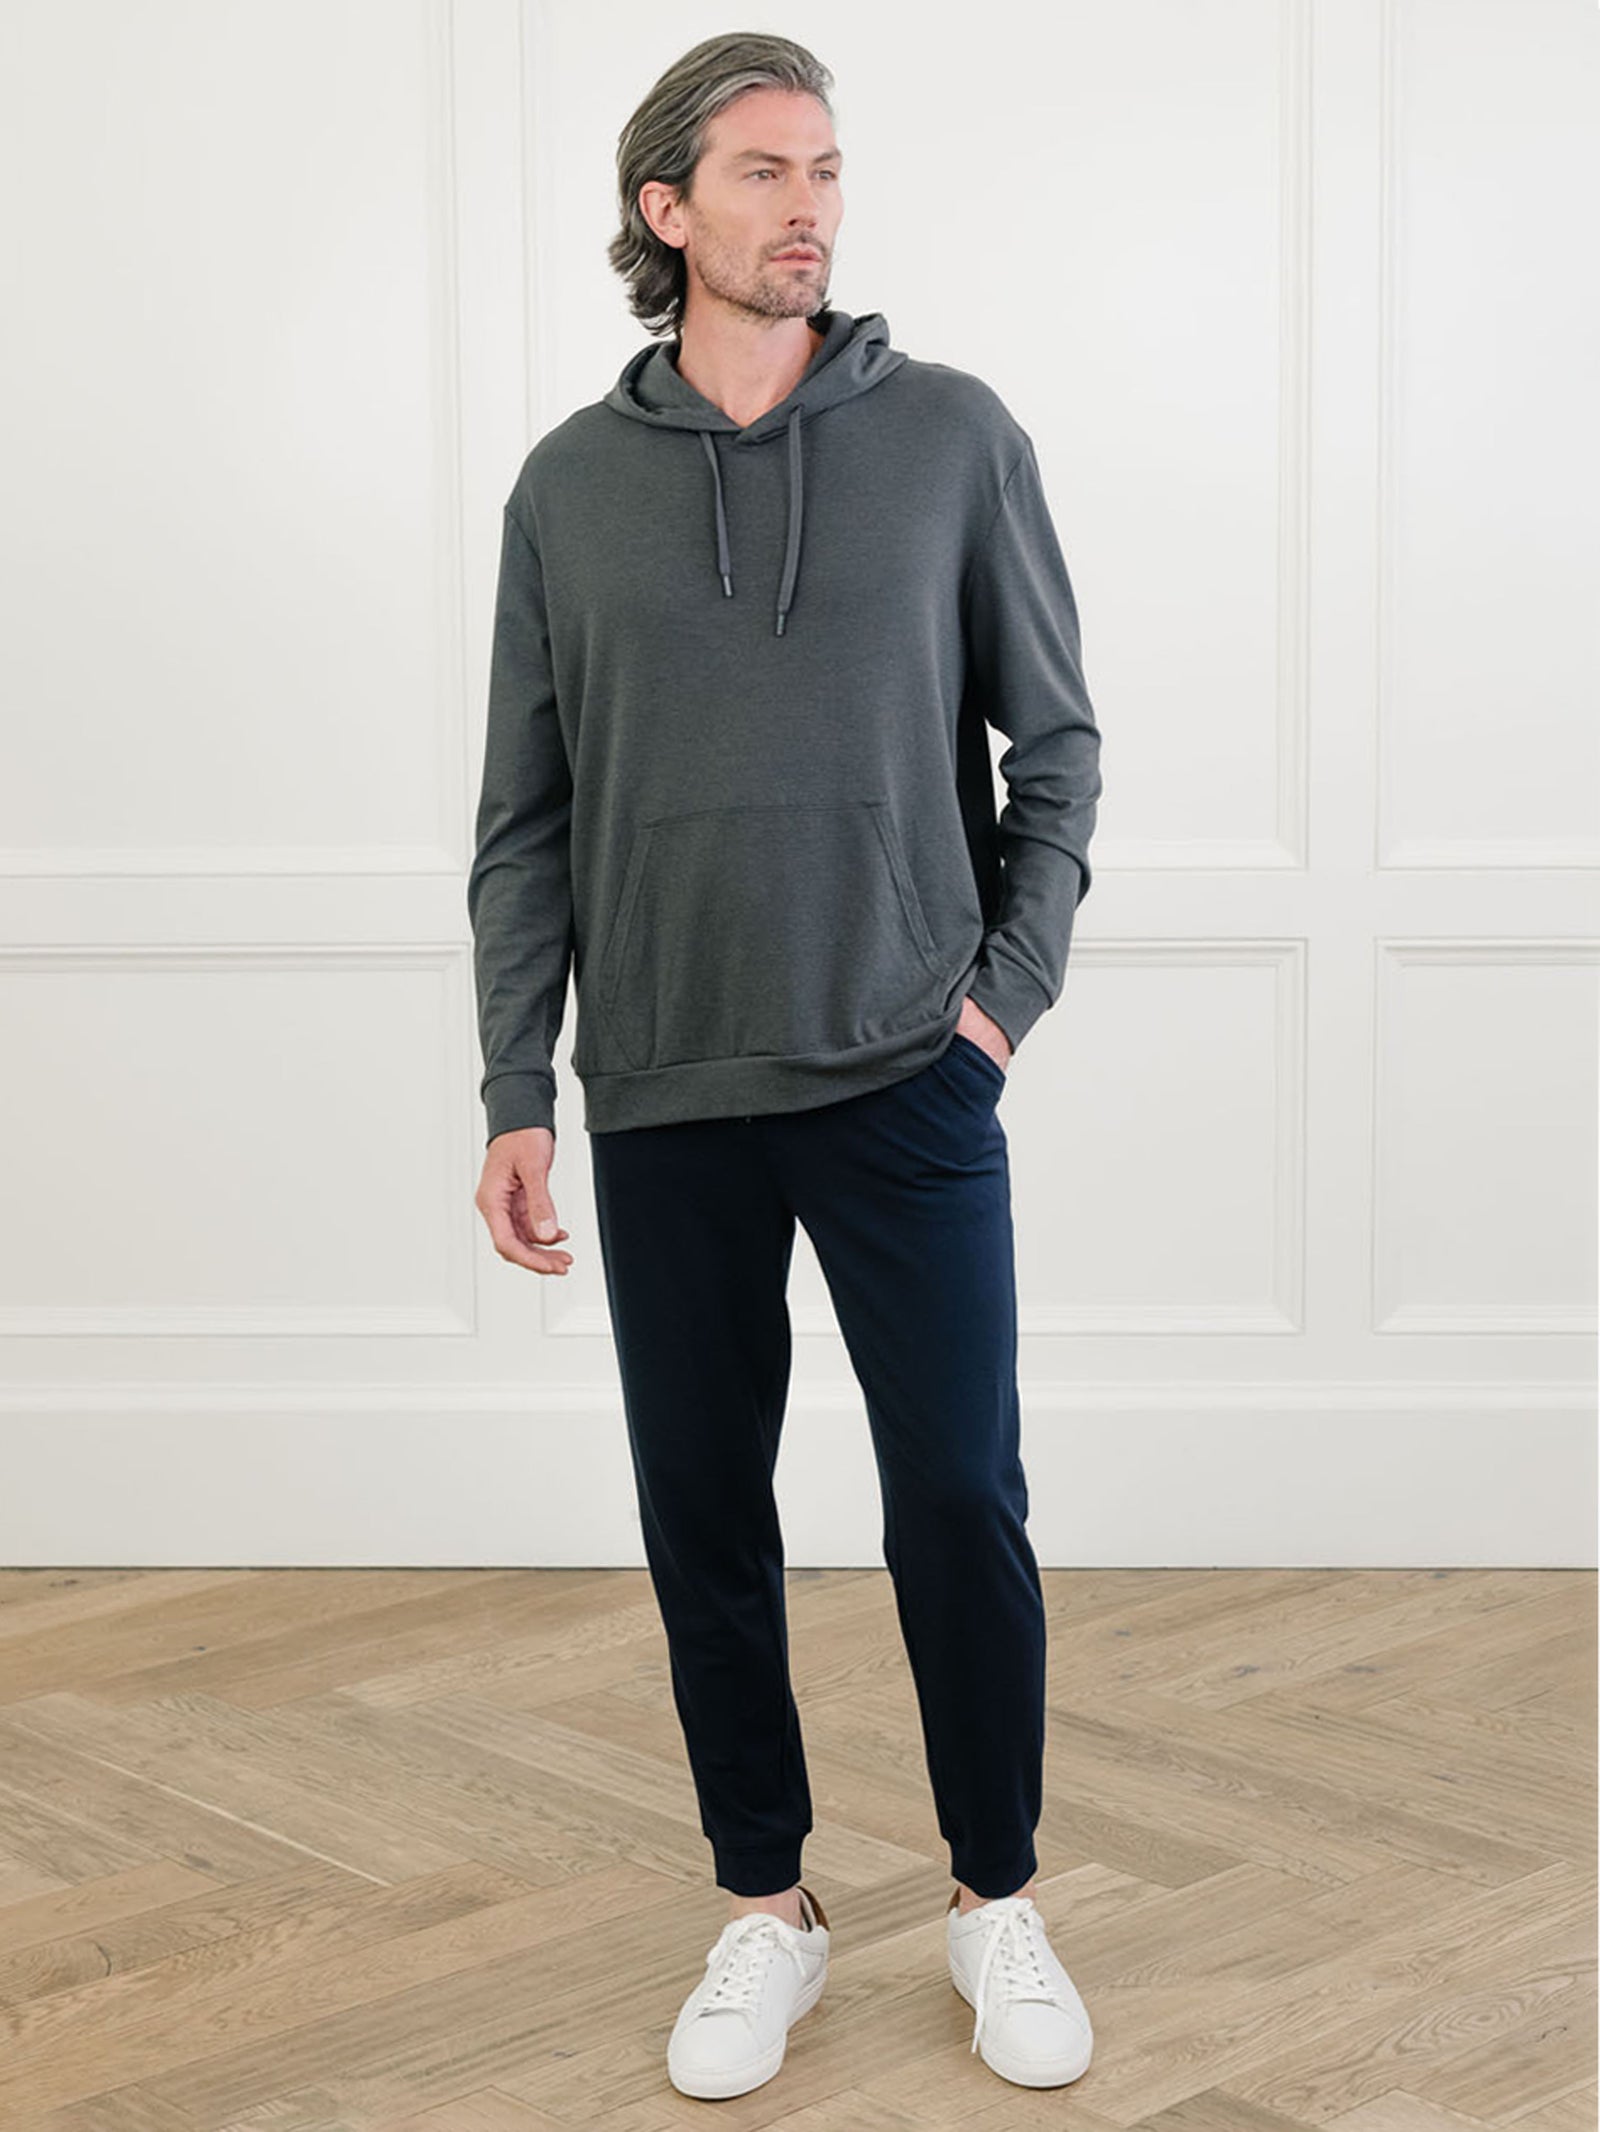 Charcoal Bamboo Hoodie worn by man standing in front of white background.